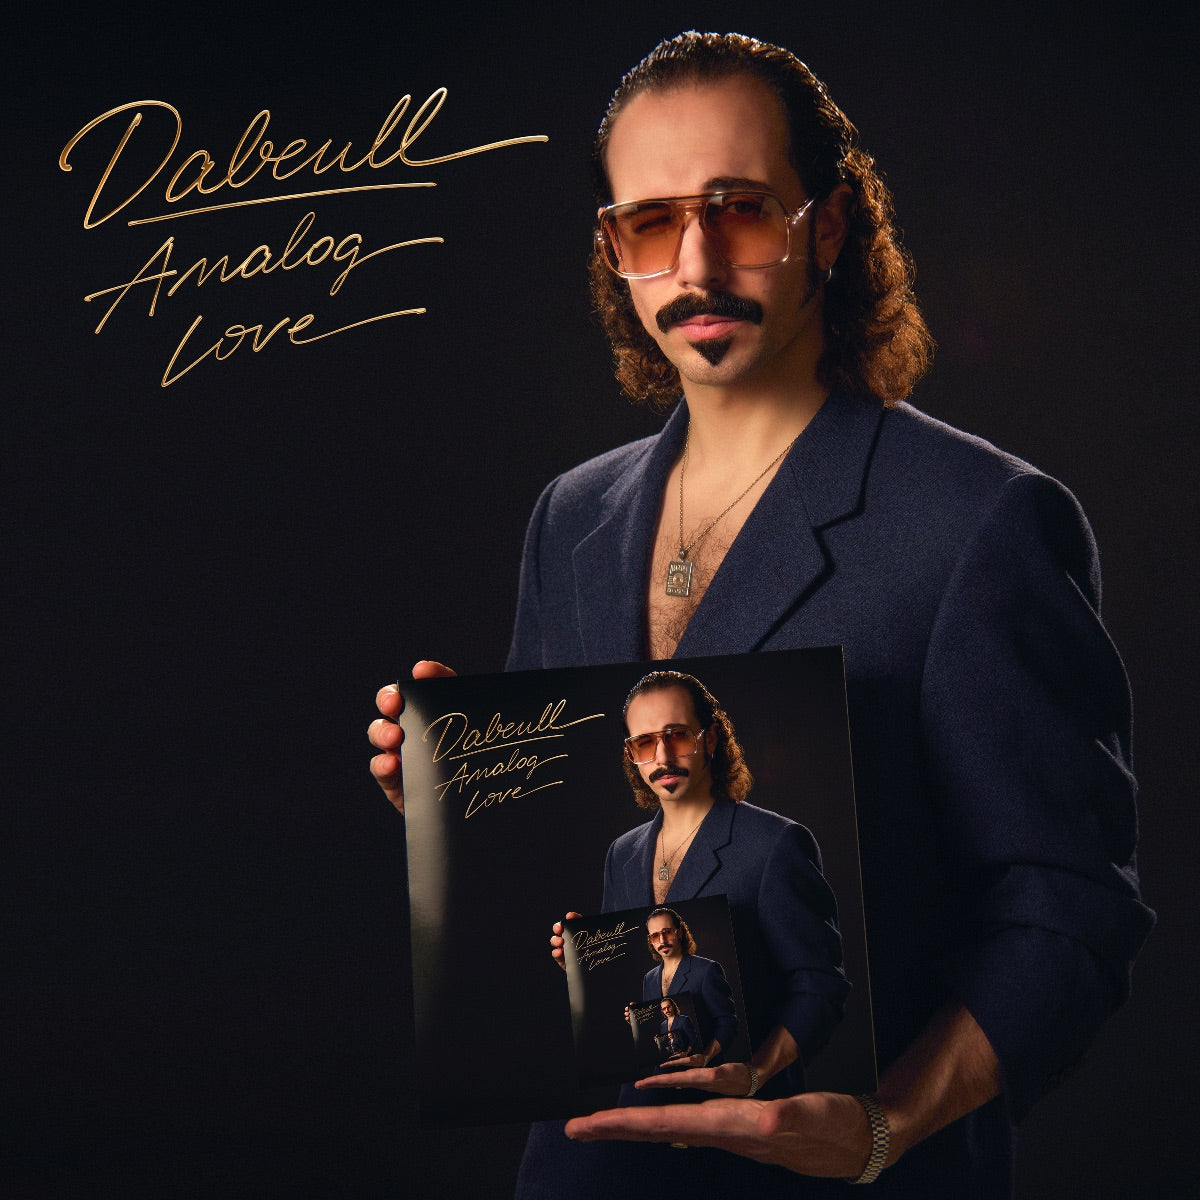 Dabeull - Analog Love: Vinyl LP (w/ Gold Hot Foil Sleeve + 8 Page Booklet)